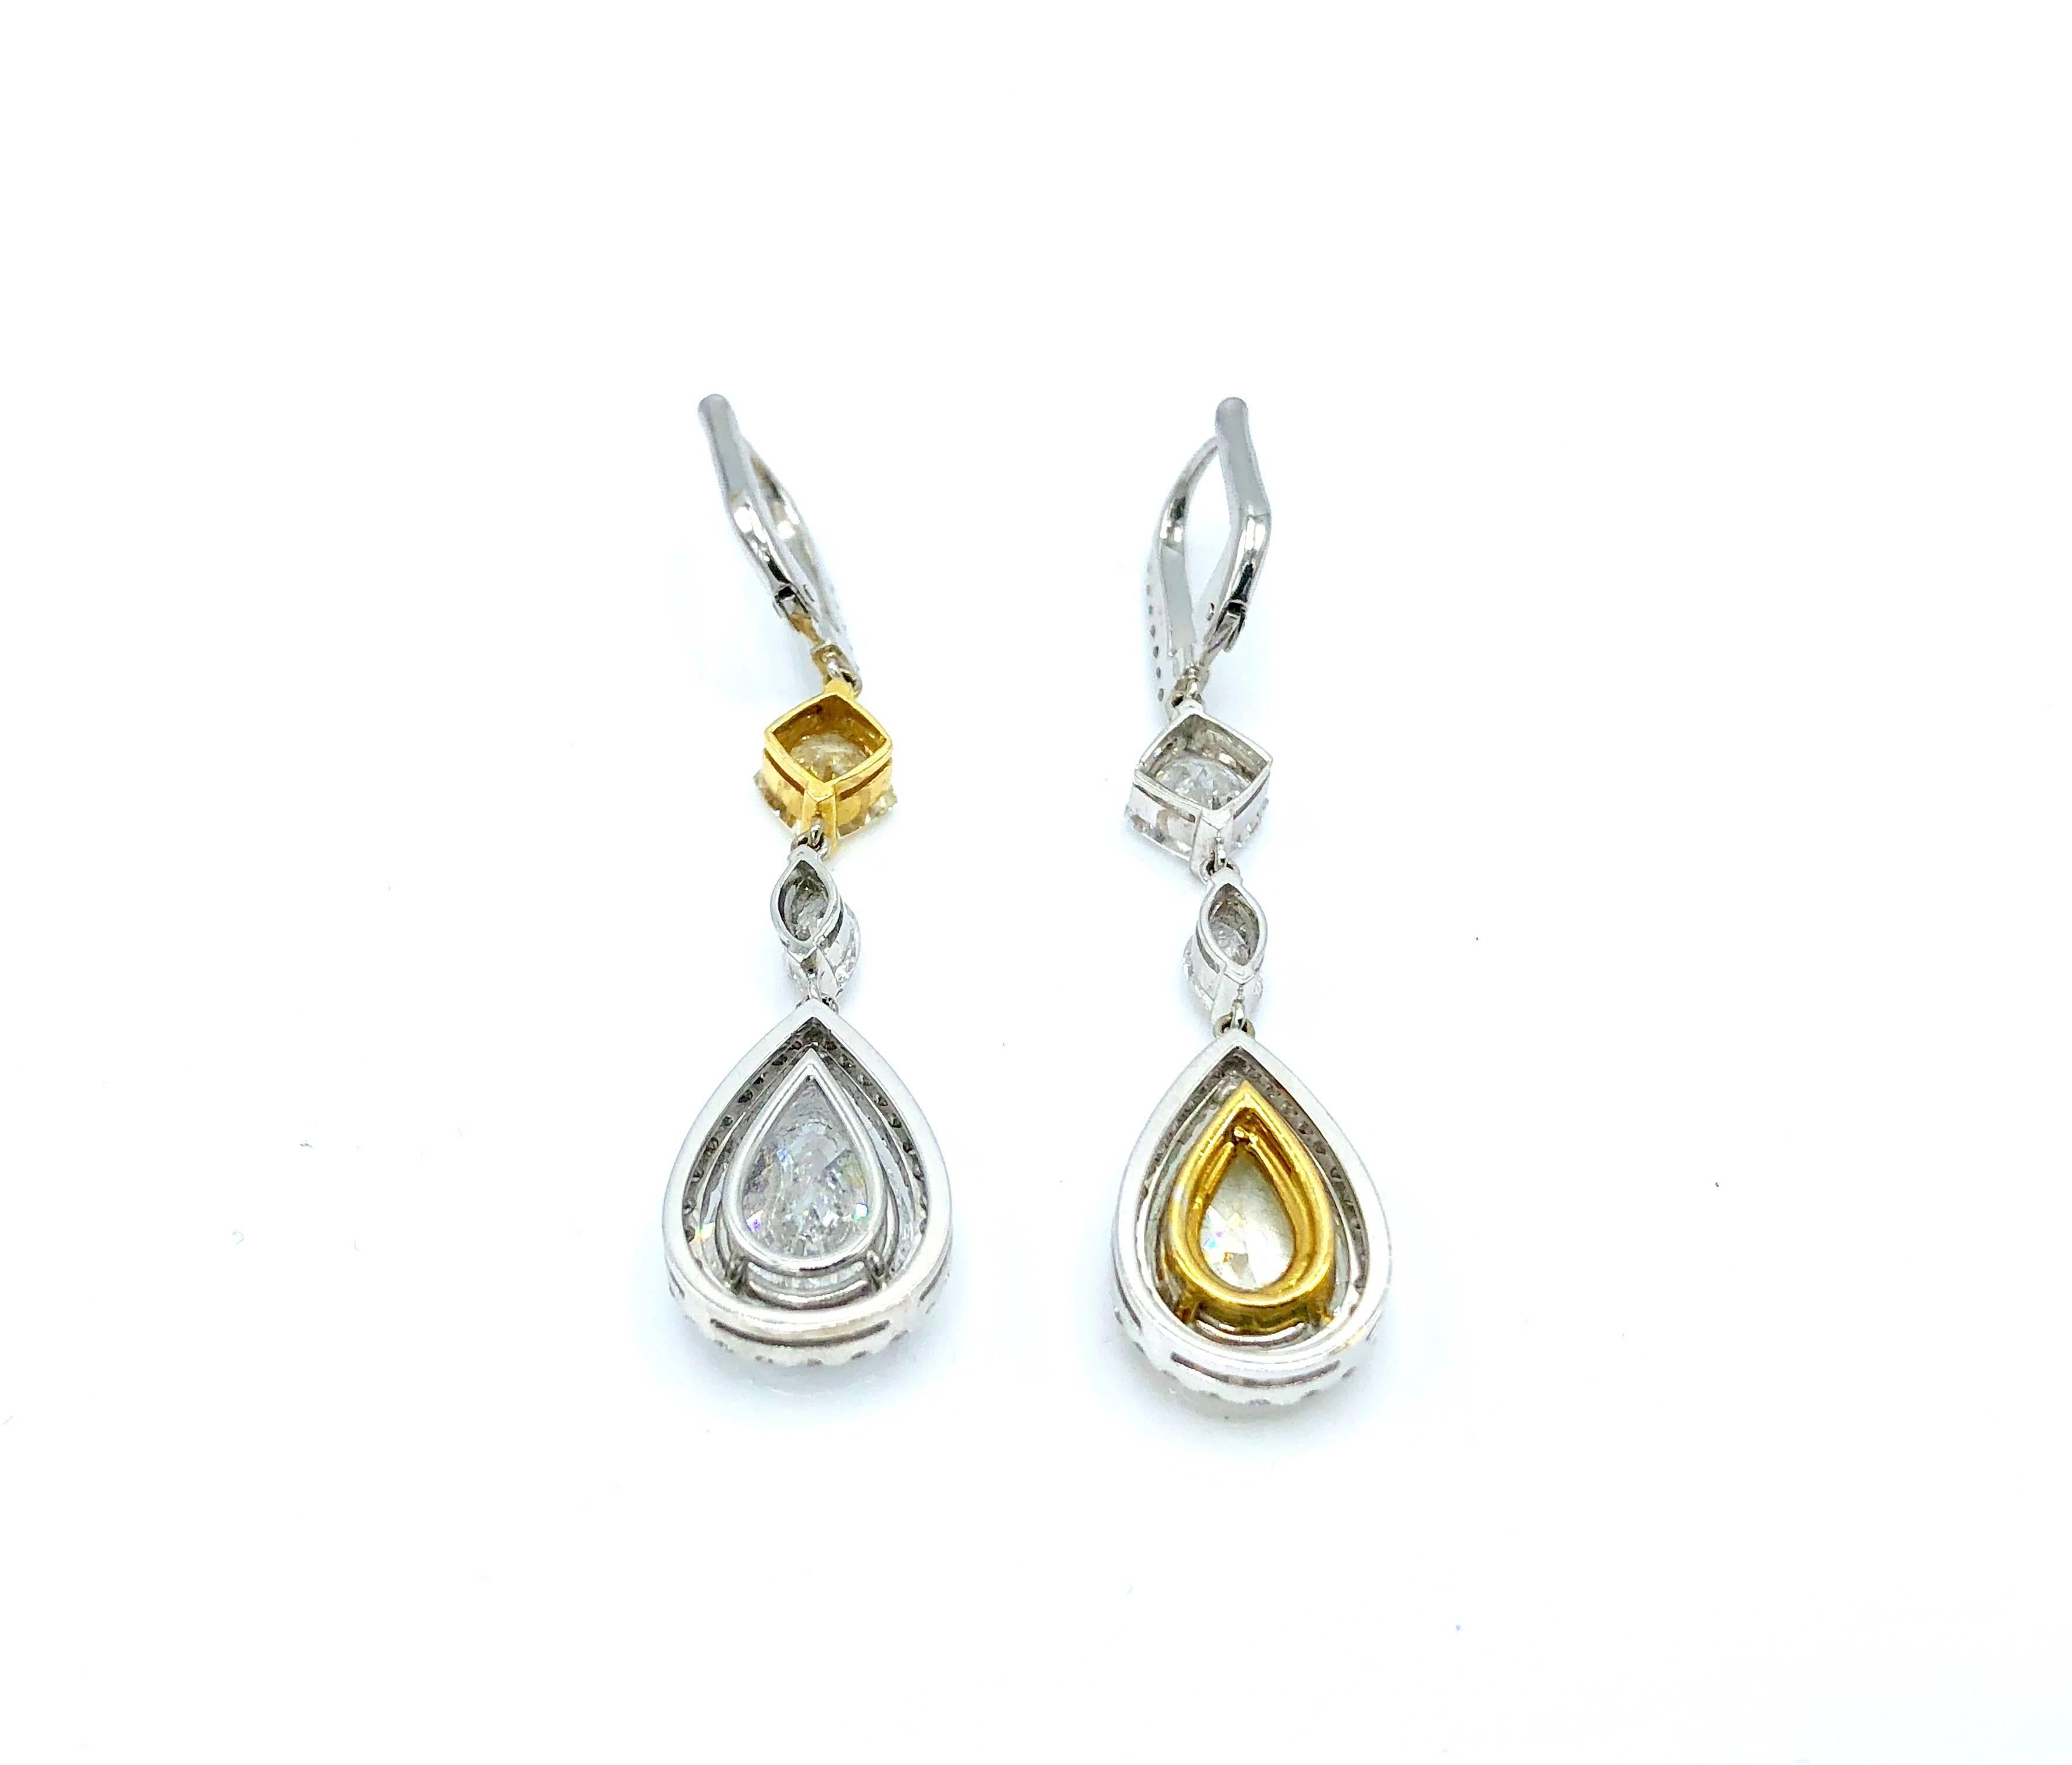 A pair of important earrings featuring 2 pear shape diamonds (1 fancy yellow)

2 Pear shape Diamonds: 6.44ct
2 Marquise Diamonds: 0.60 ct
2 Emerald cut diamonds: 1.87 ct